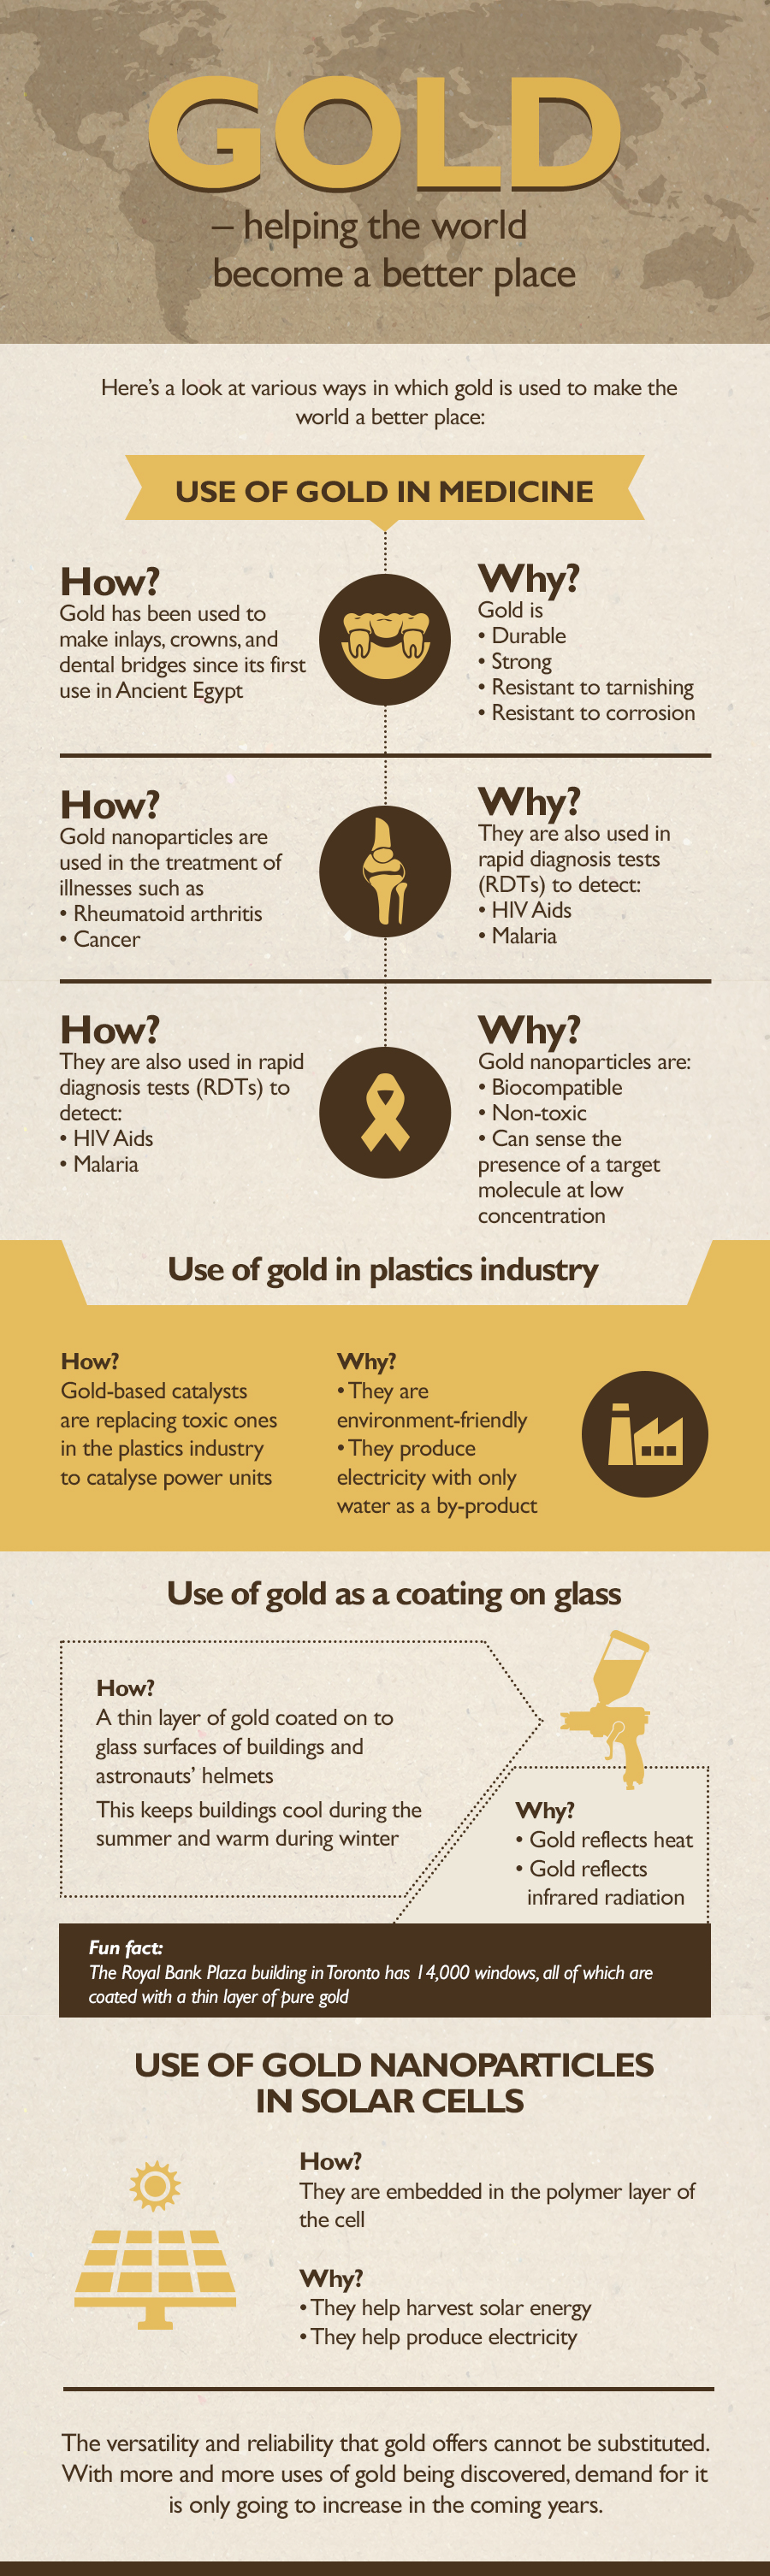 A look at various uses of gold in technology, medicine and engineering